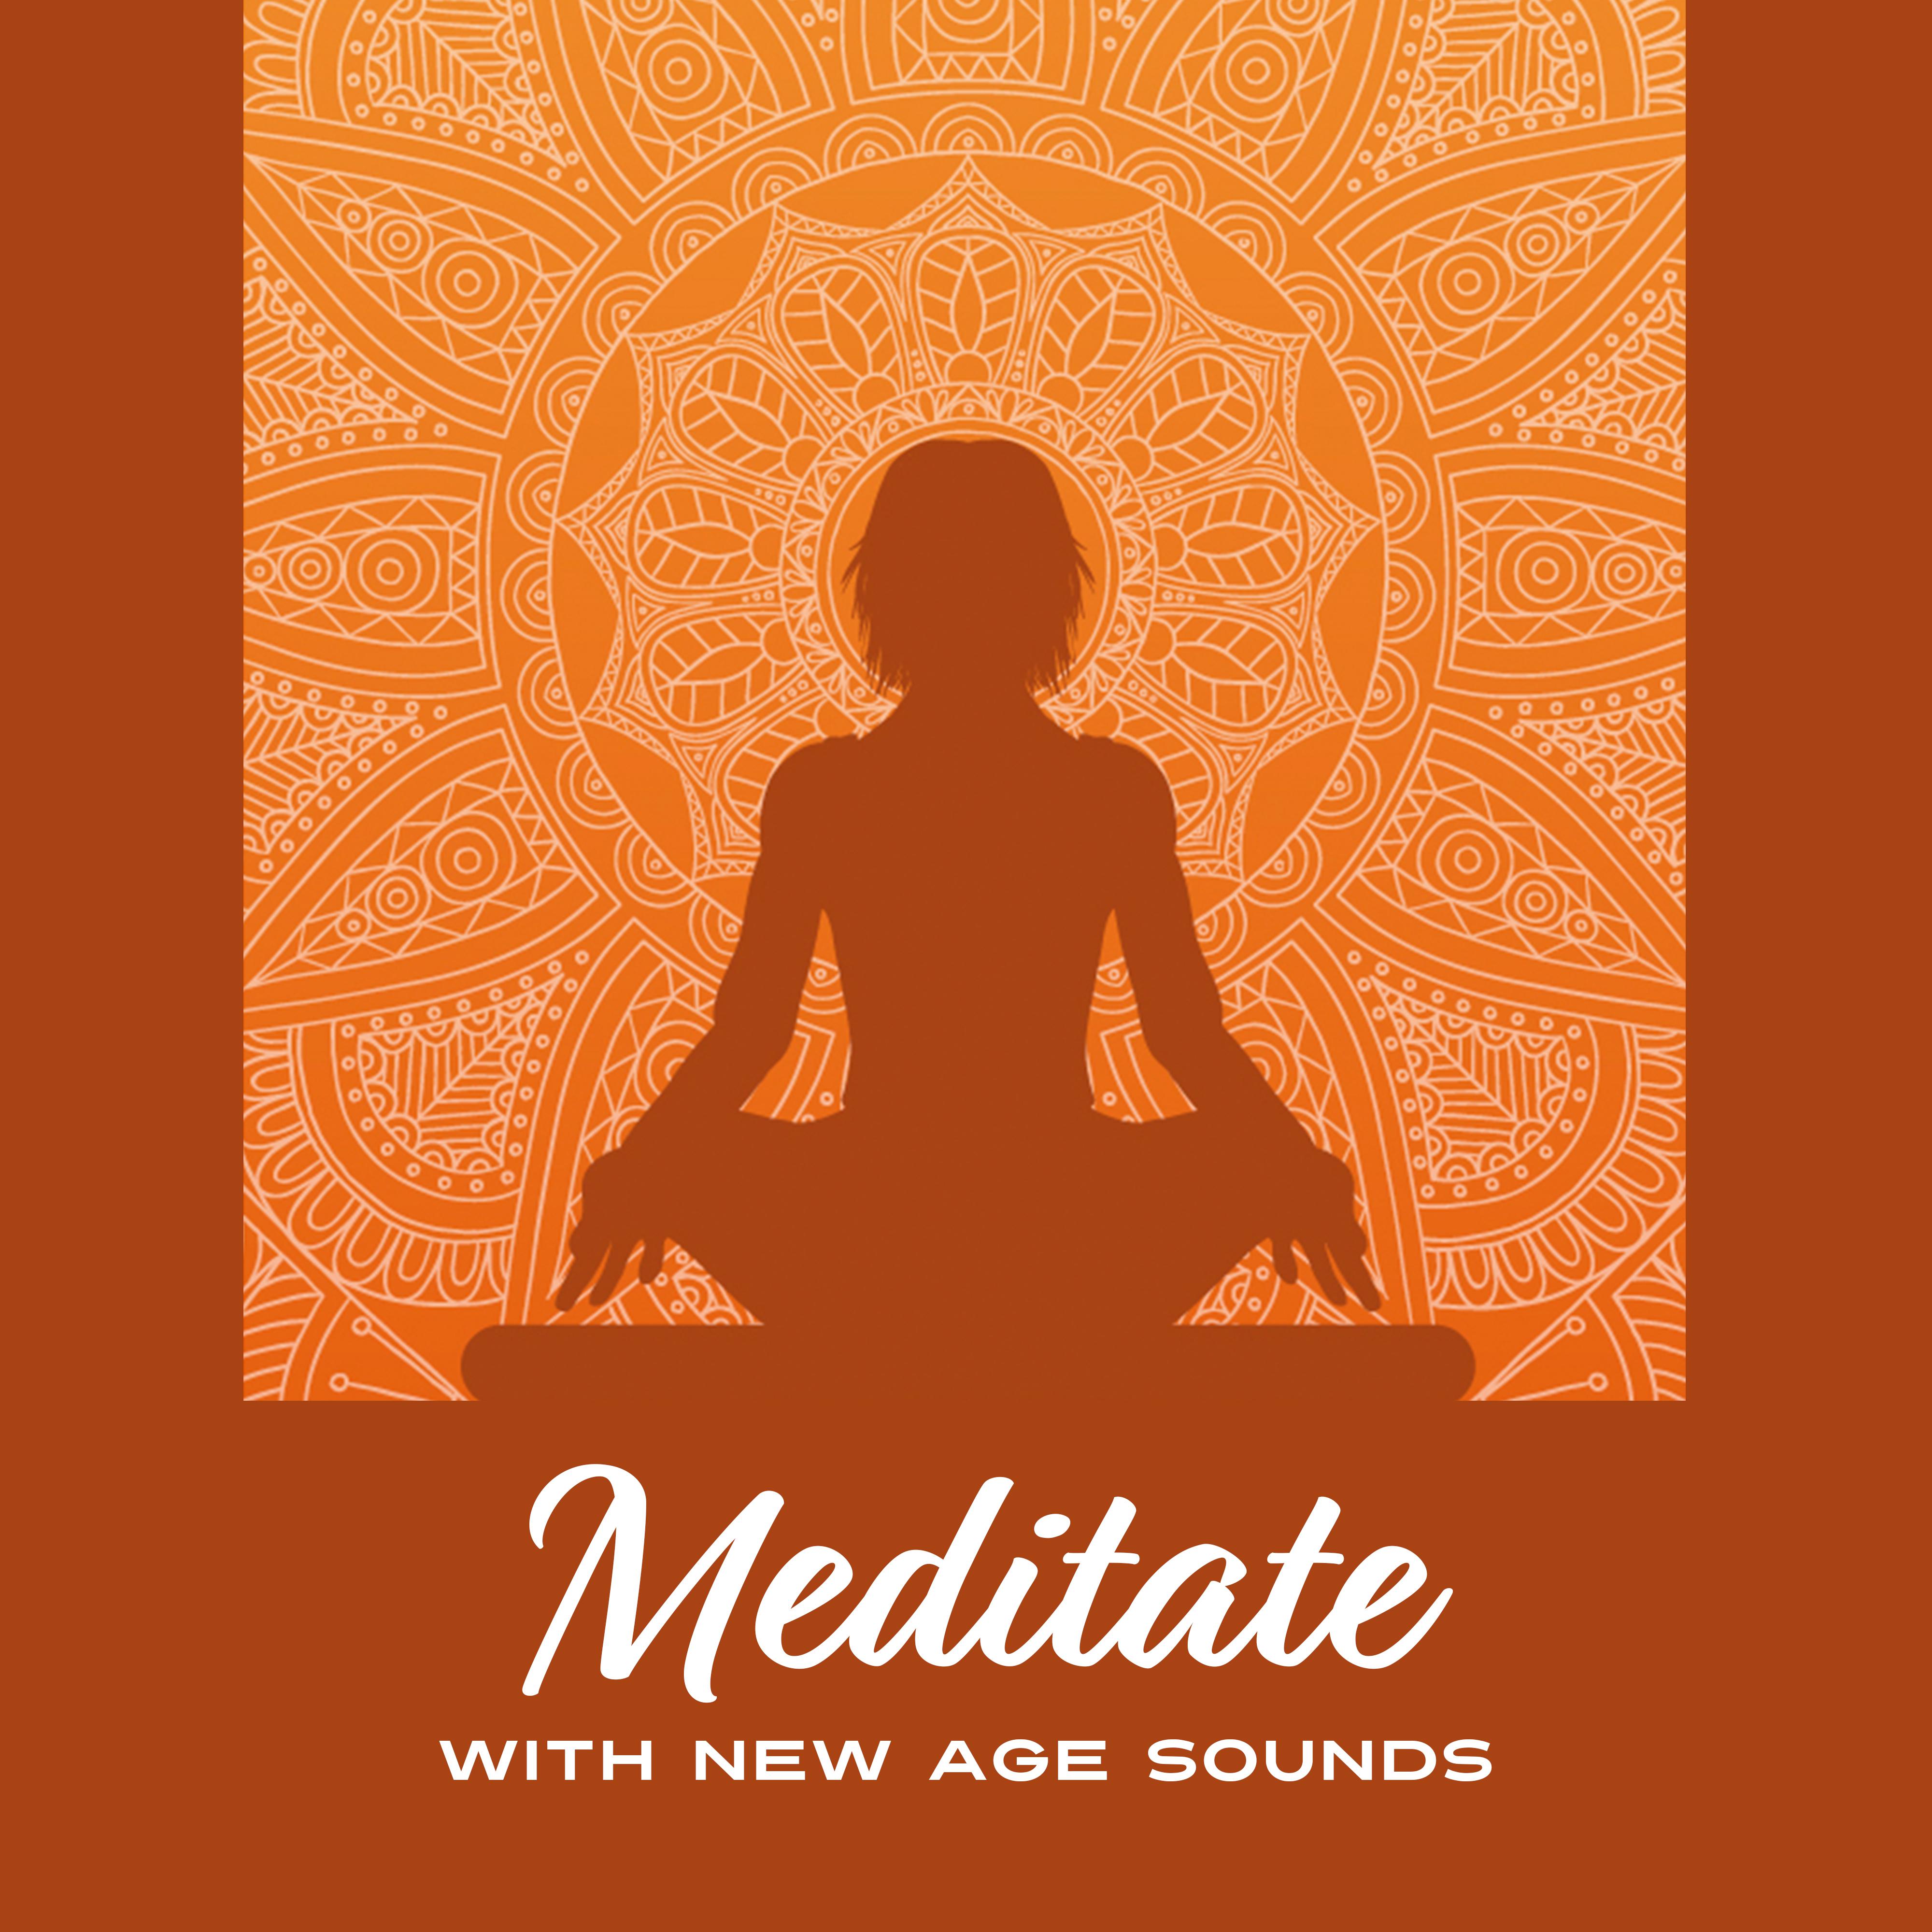 Meditate with New Age Sounds